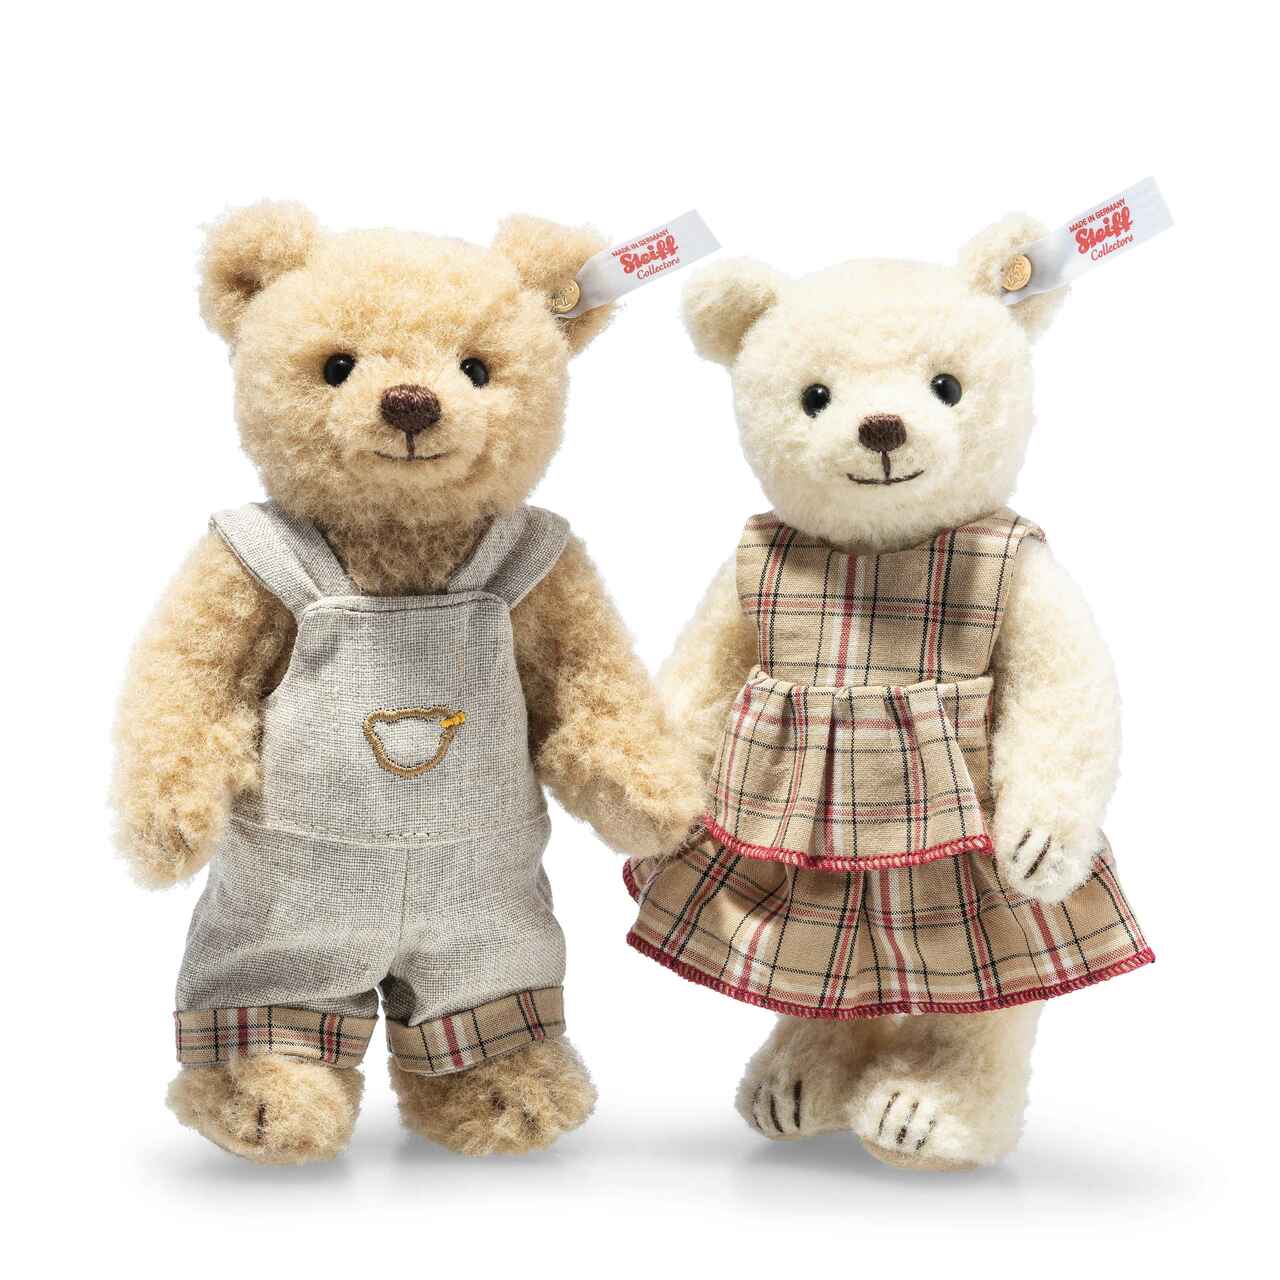 "Year of the Teddy Bear" Sister and Brother Teddy Bears Limited Edition-Ben & Mila